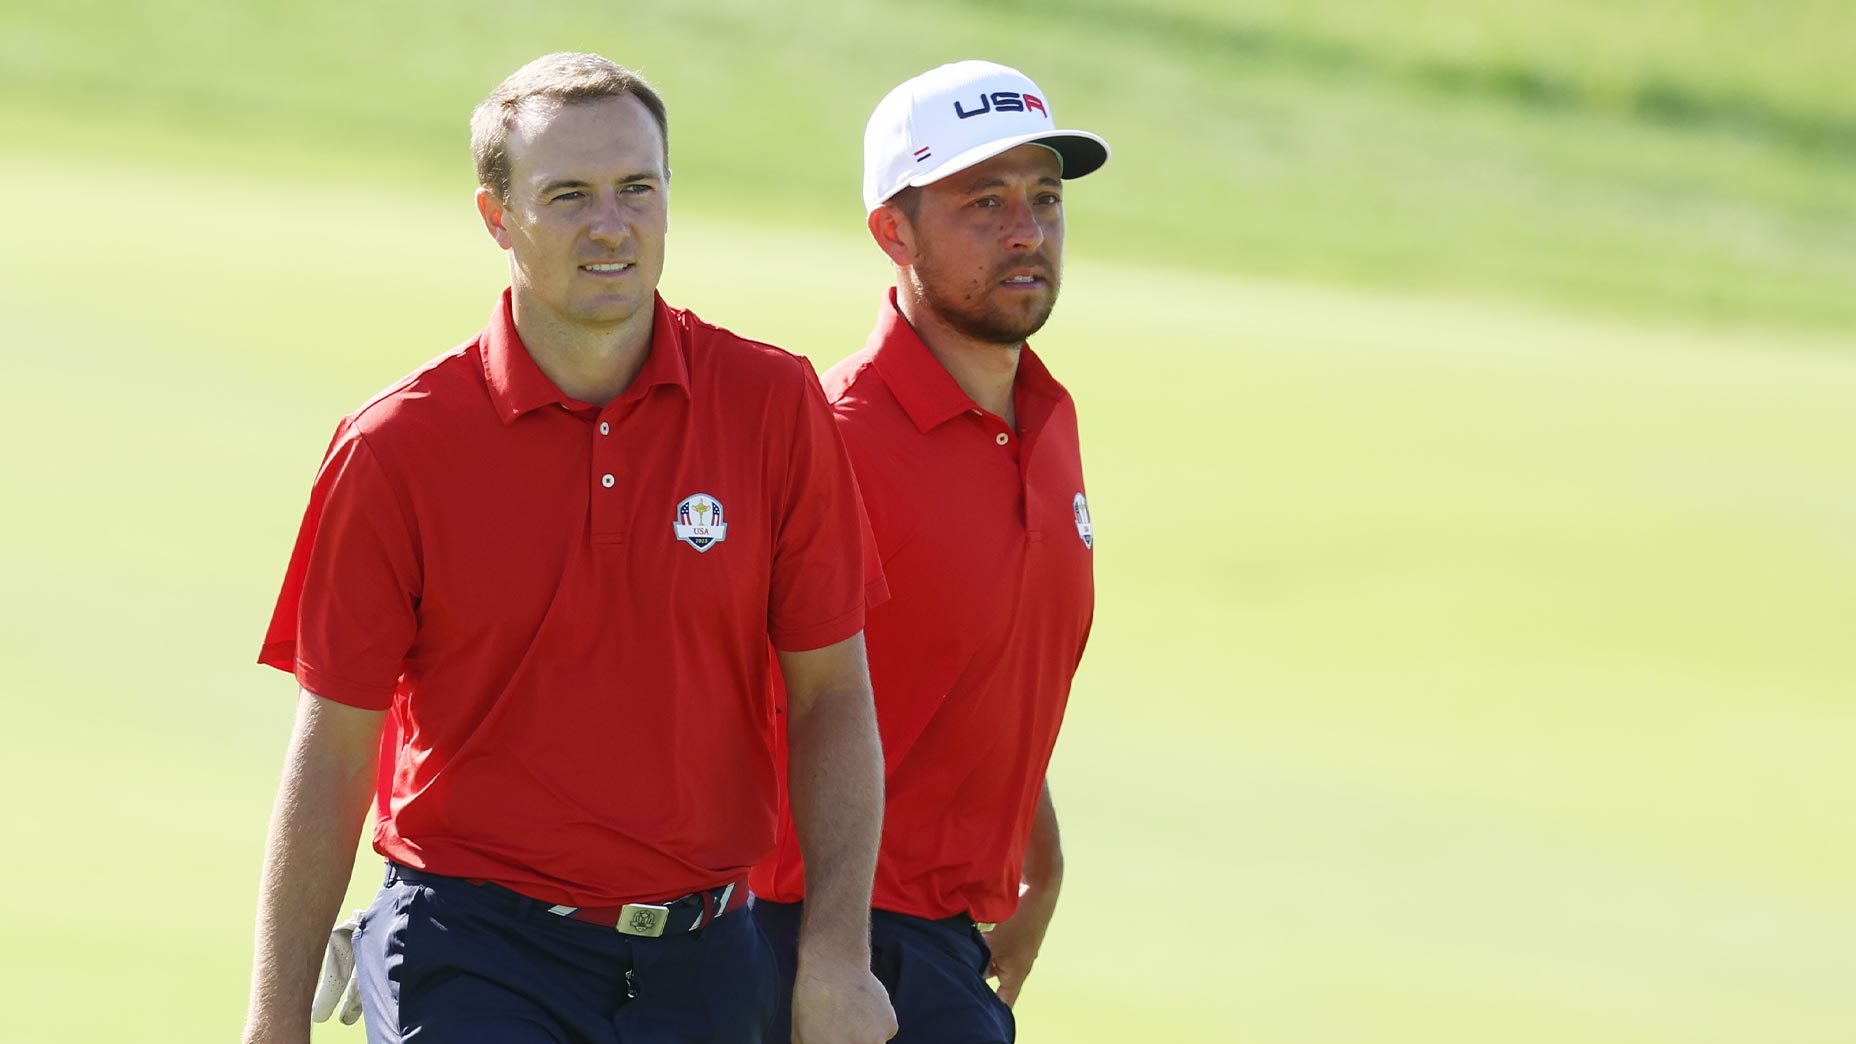 jordan spieth and xander schauffele stand next to one another at the Ryder Cup.